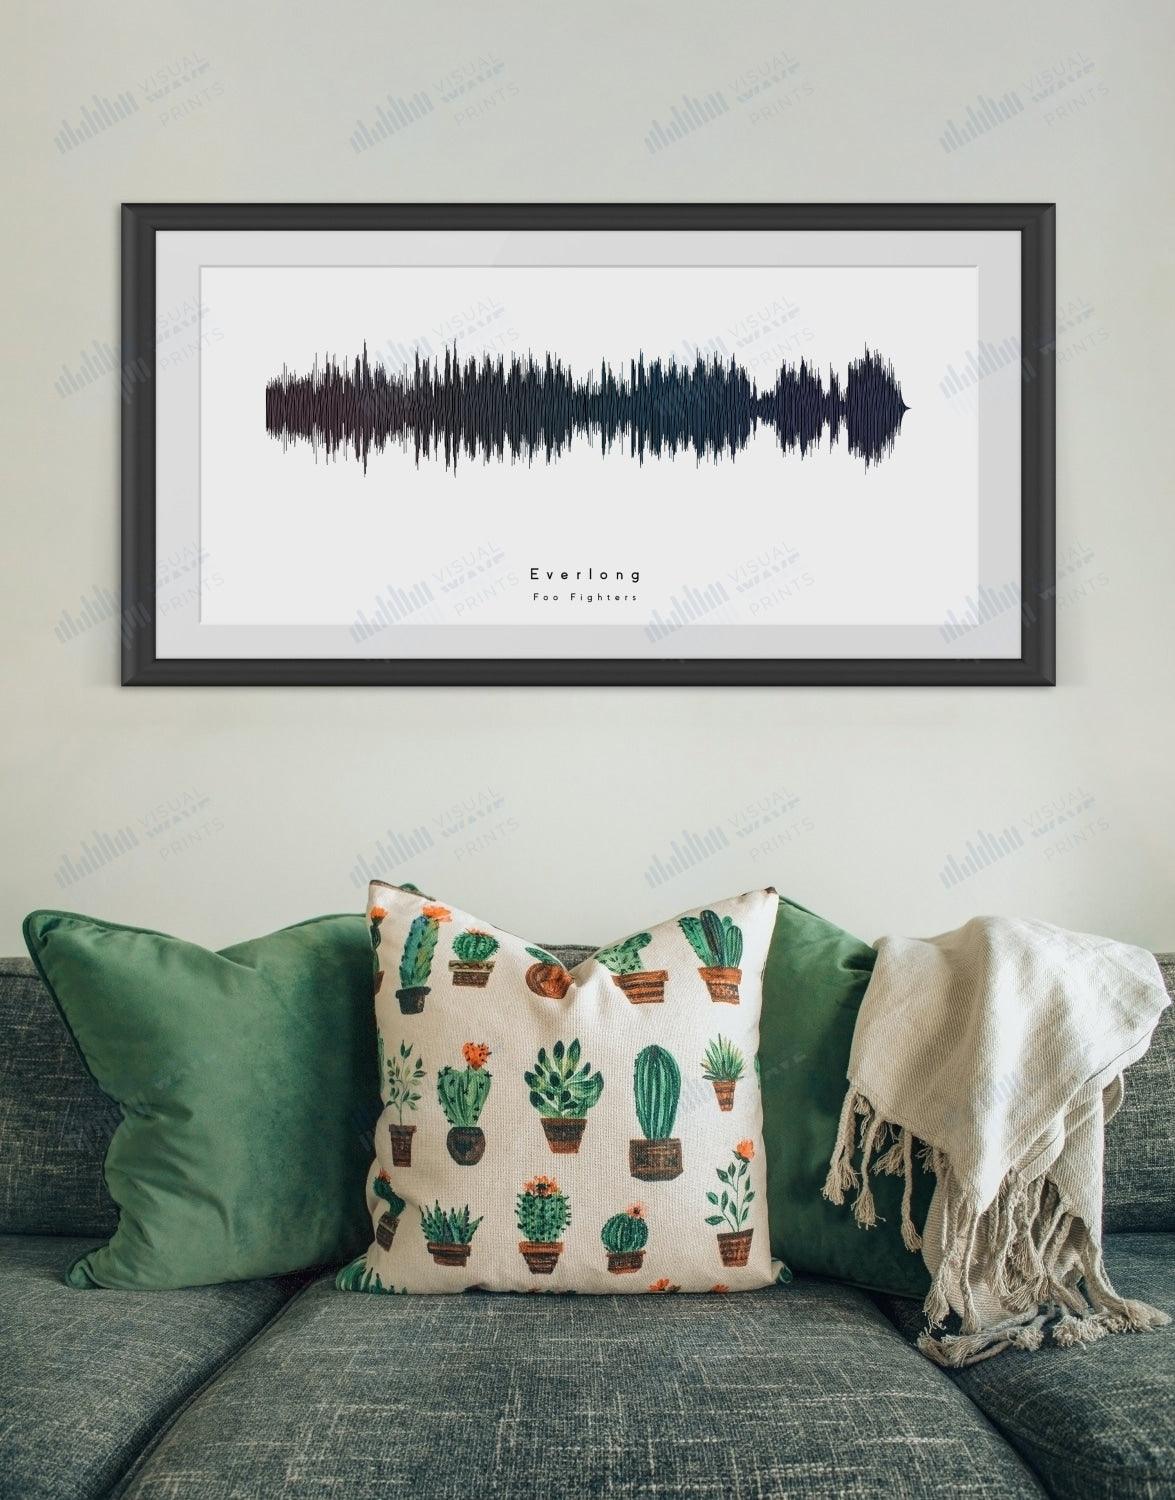 Everlong by Foo Fighters - Visual Wave Prints